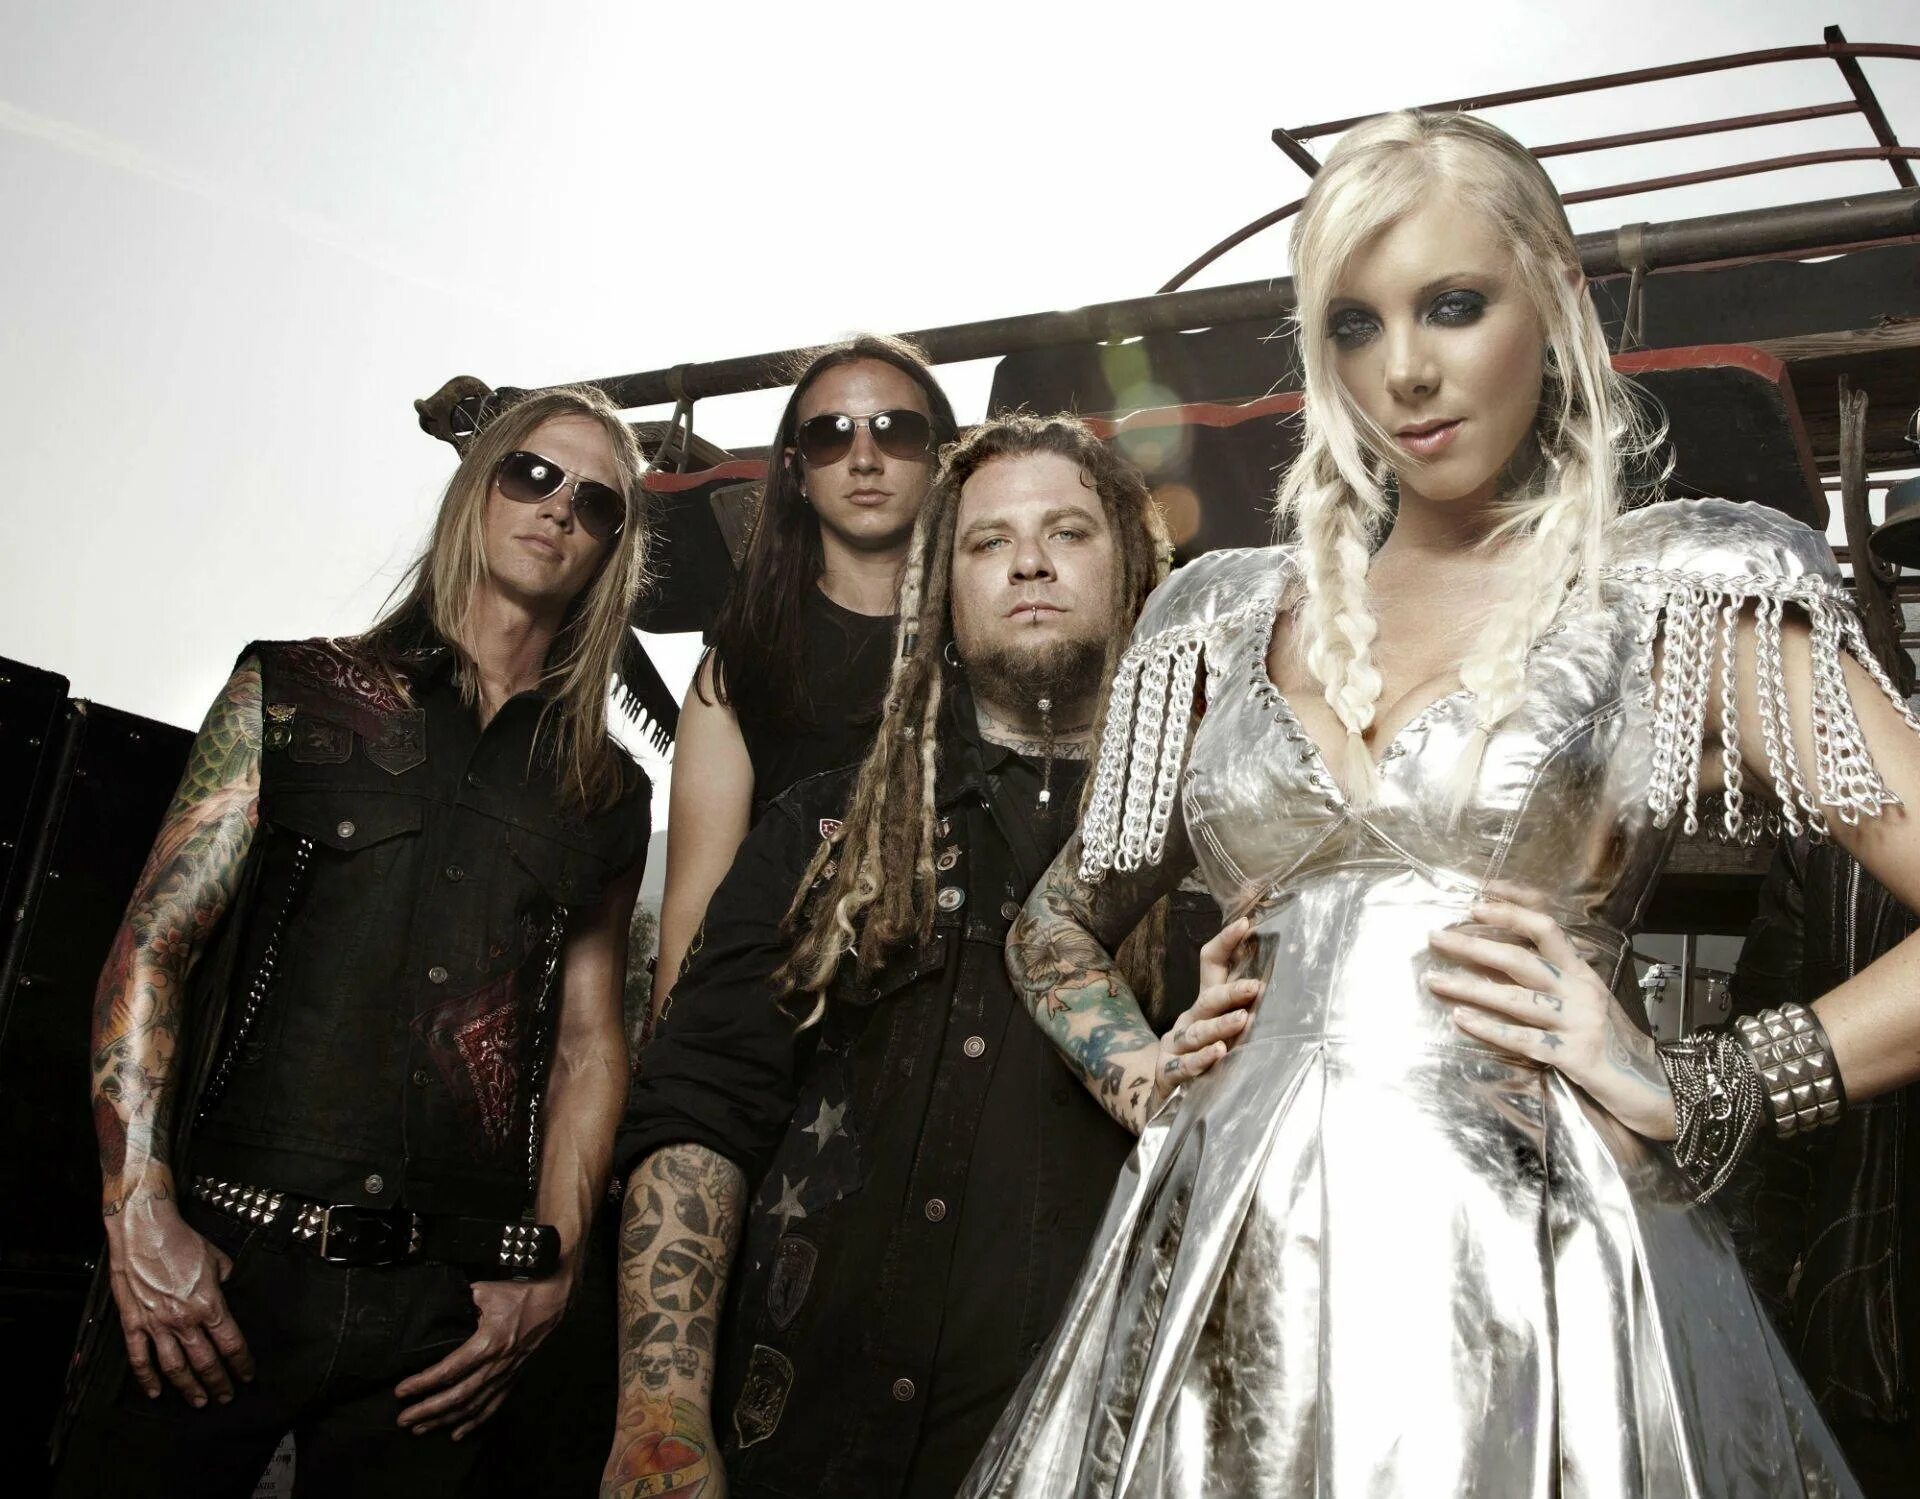 Maria brink. Группа in this moment. In this moment фото группы.